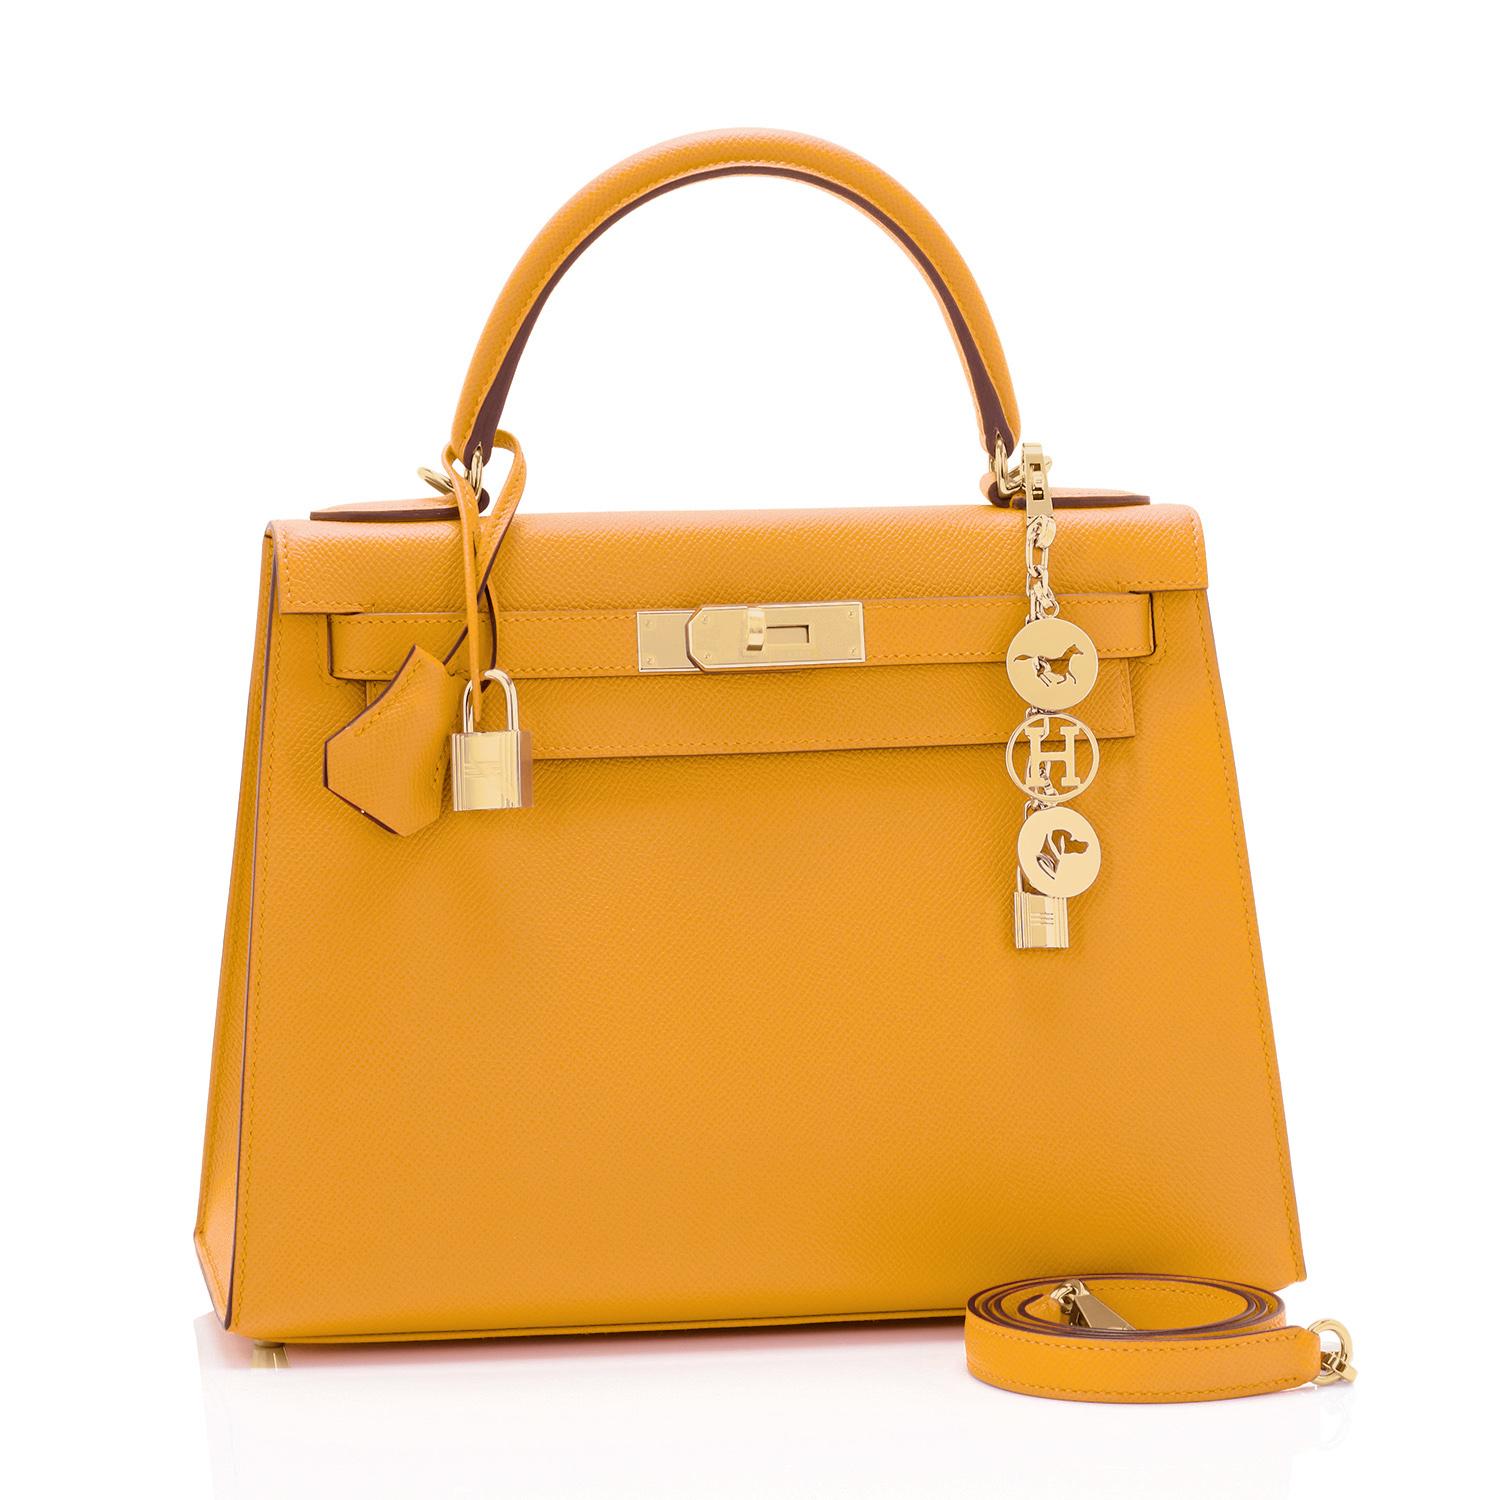 Hermes Kelly 28cm Jaune Ambre Epsom Gold Sellier Shoulder Bag Y Stamp, 2020
Rare Jaune Ambre Kelly with gold hardware combination!
Just purchased from Hermes store. Bag bears new 2020 interior Y Stamp.
Brand New in Box. Store Fresh. Pristine